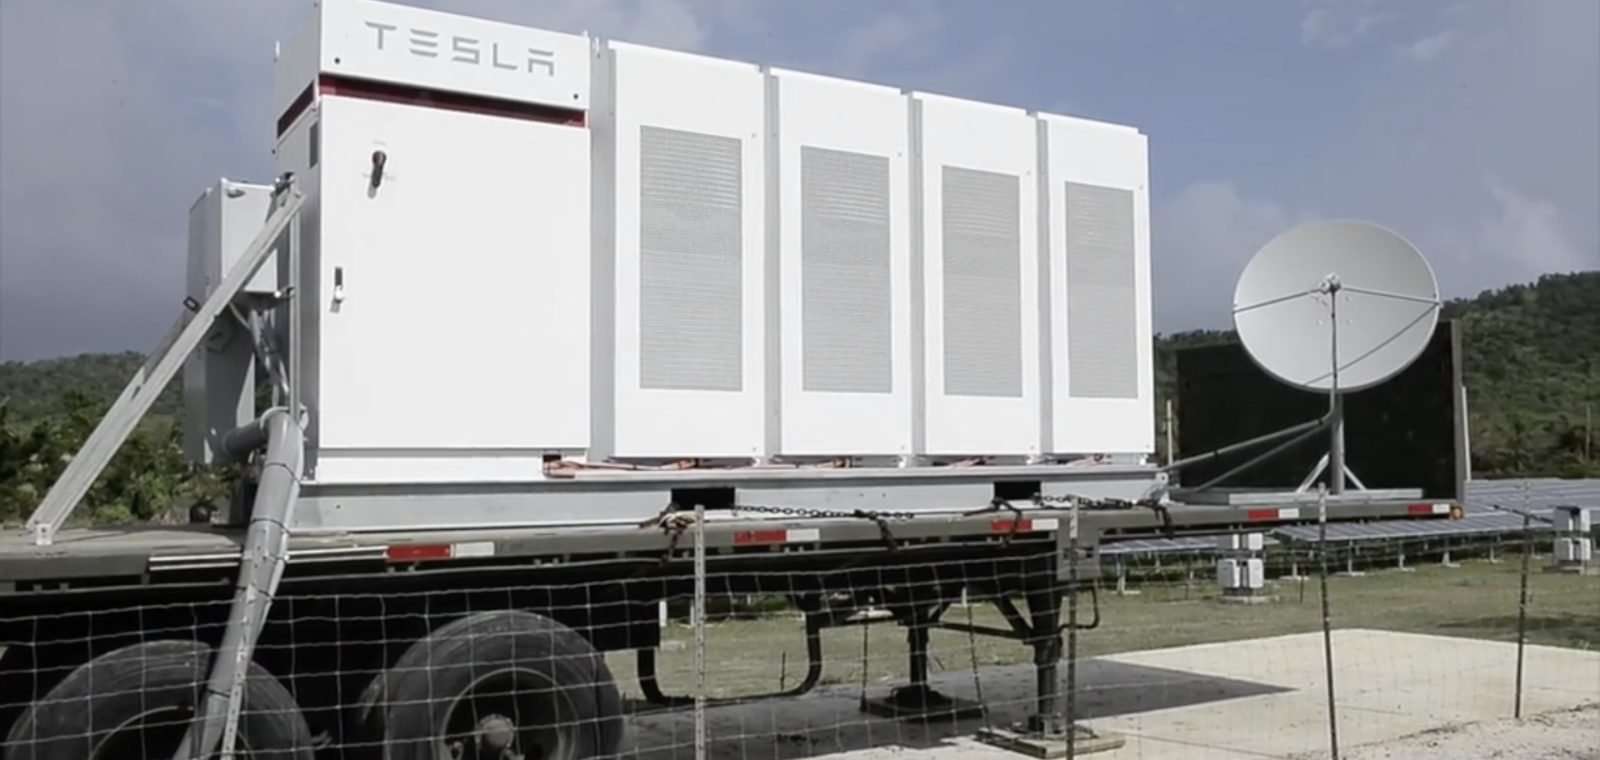 image for Tesla deploys 6 battery projects in order to power two islands in Puerto Rico, more to come